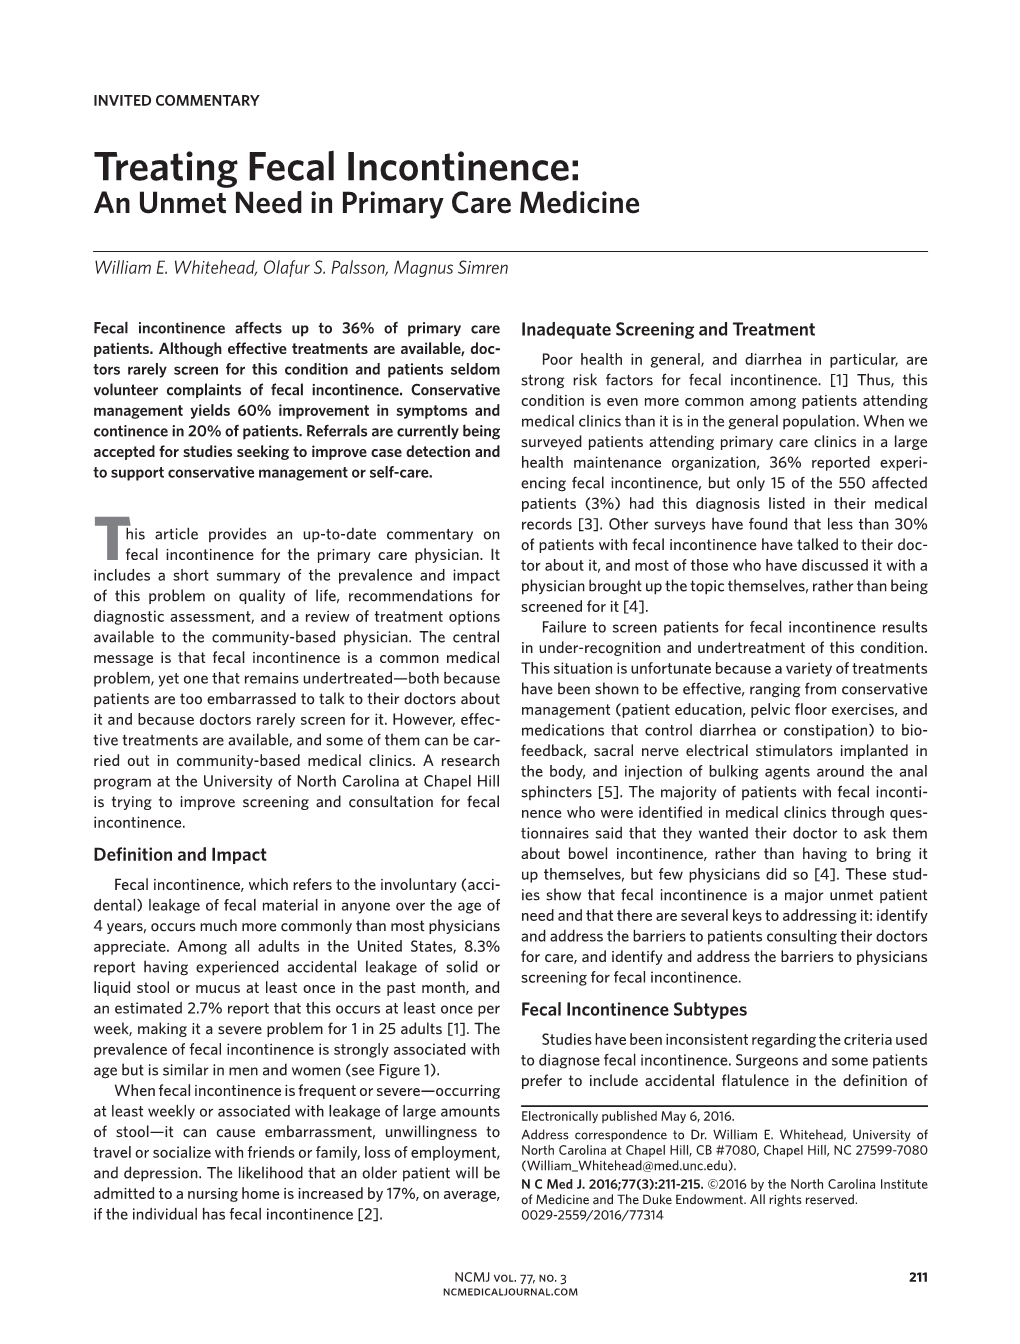 Treating Fecal Incontinence: an Unmet Need in Primary Care Medicine